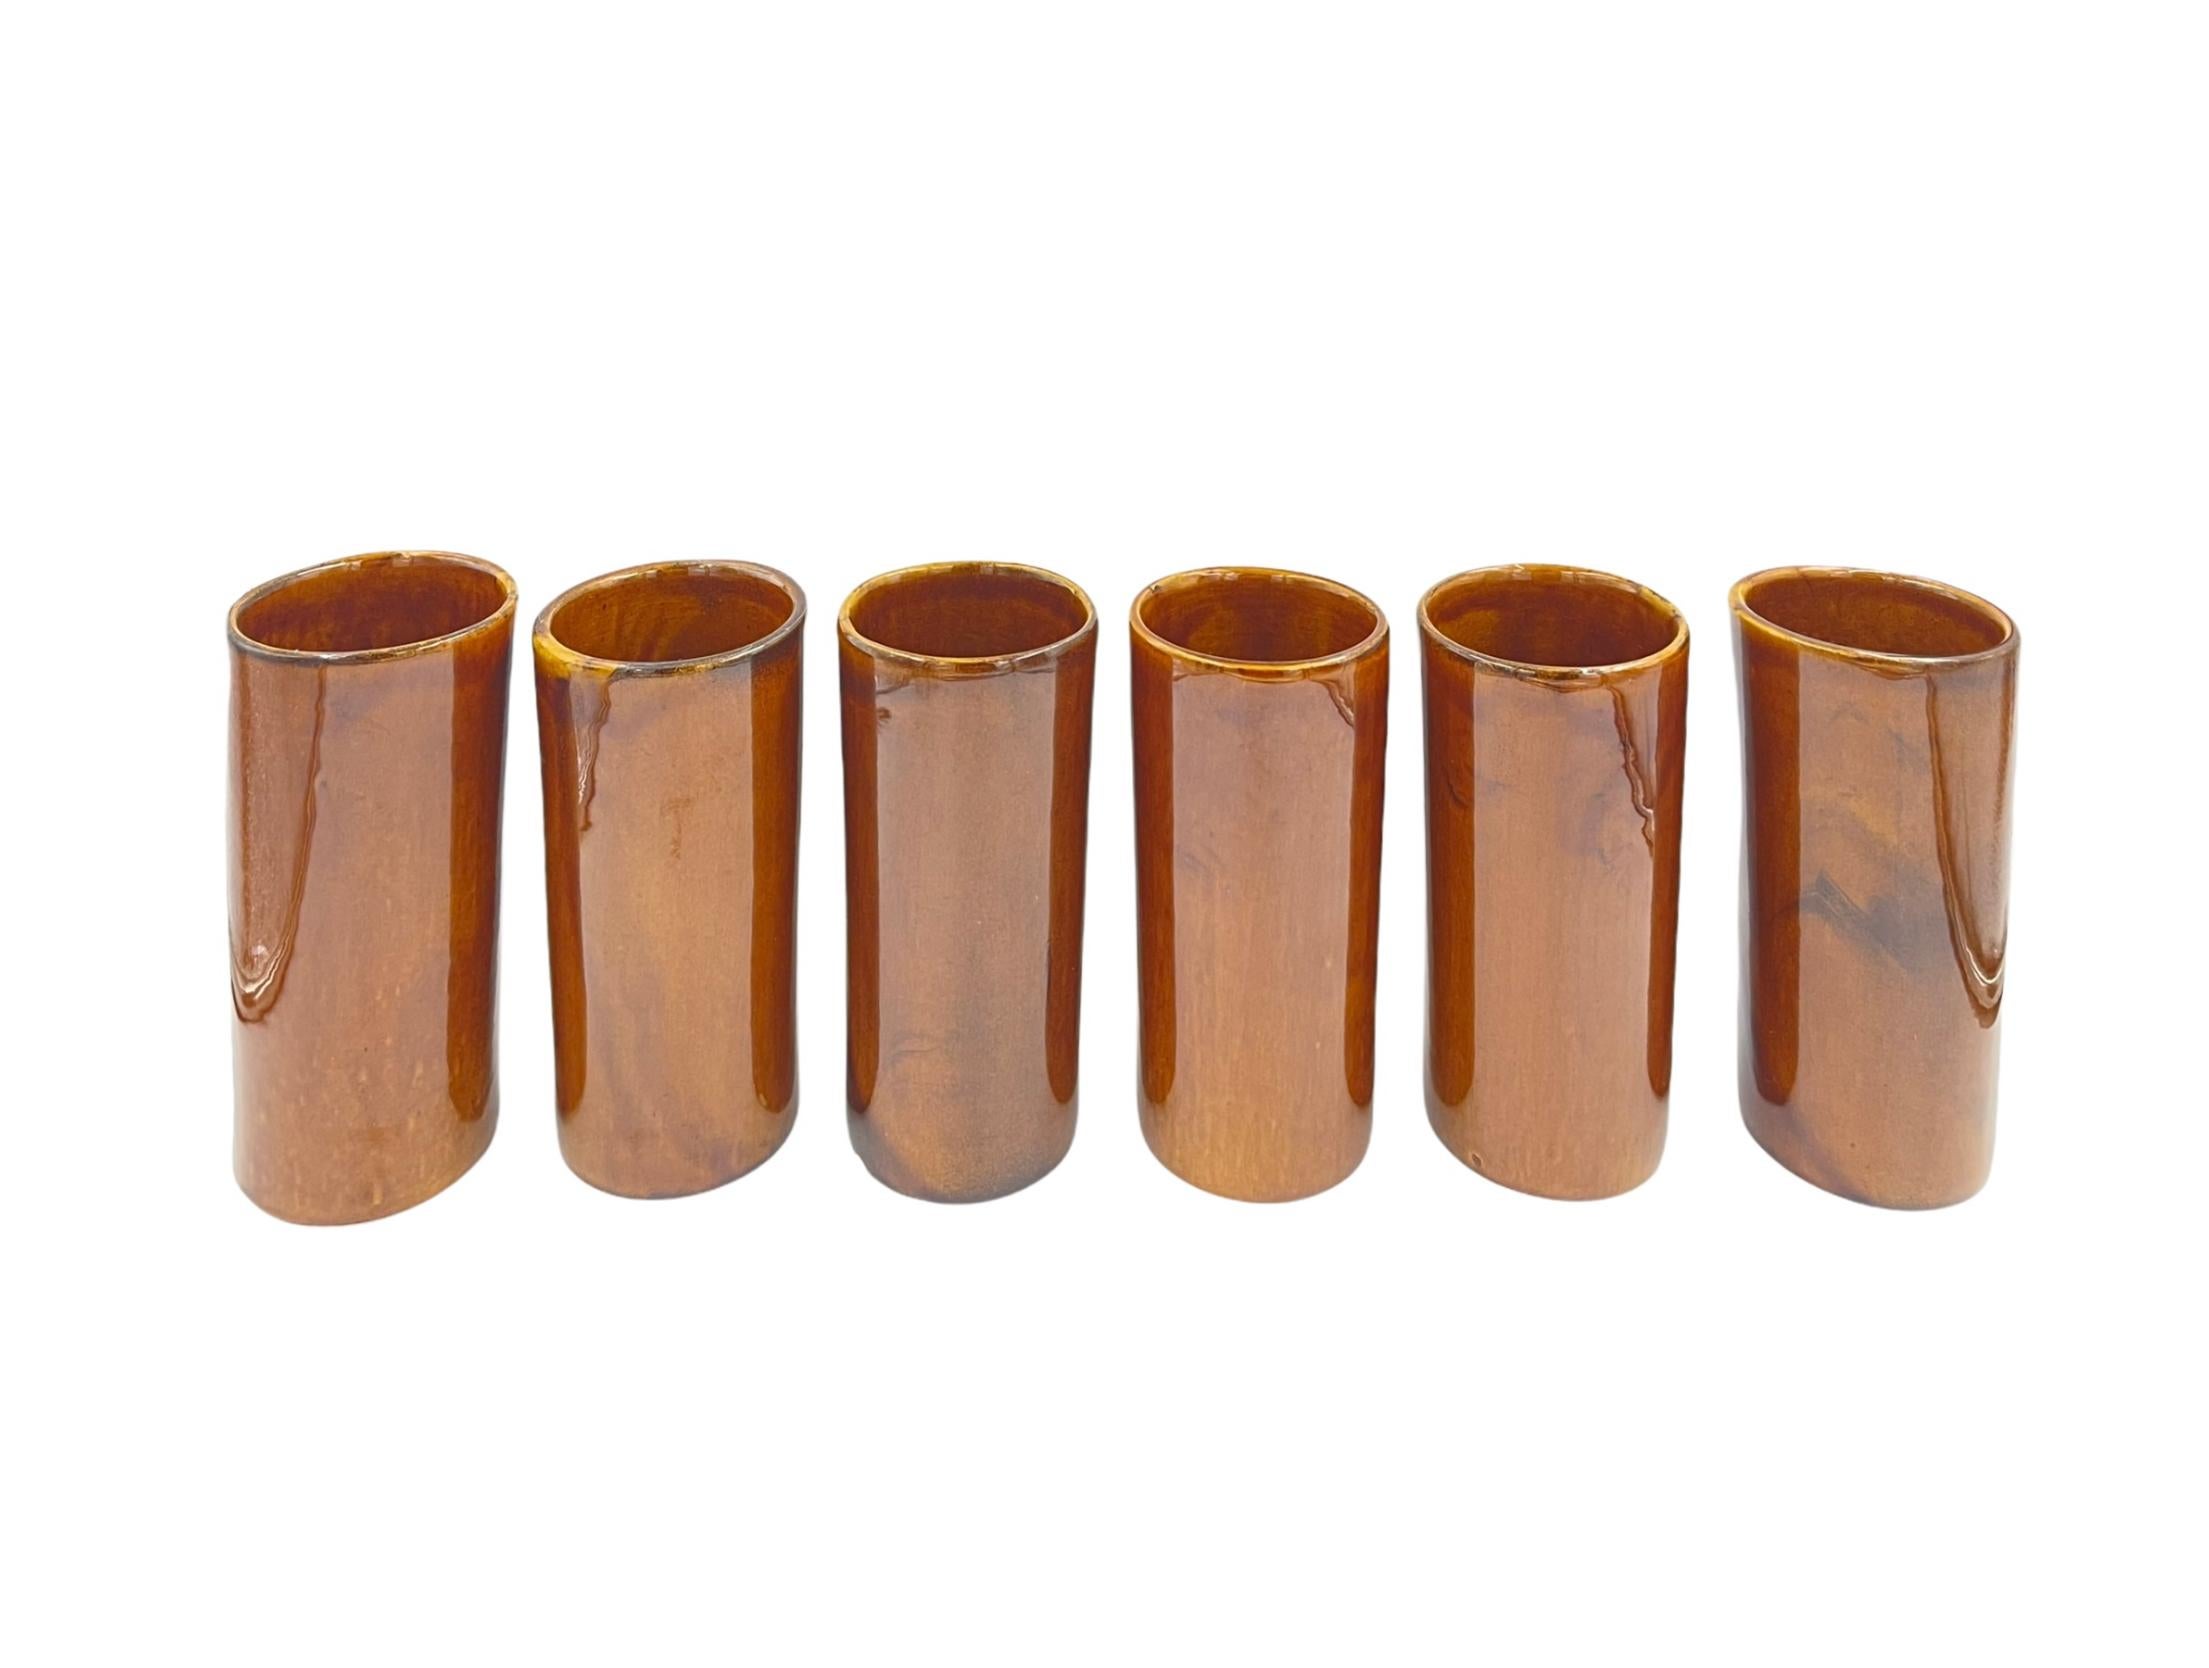 Brown ceramic vessels by Van Briggle of Colorado Springs, Colorado. Could be used as drinking glasses, or as vases for centerpiece decor. 
Measures: 6” height x 2.75” diameter

Van Briggle Art Pottery was at the time of its demise the oldest